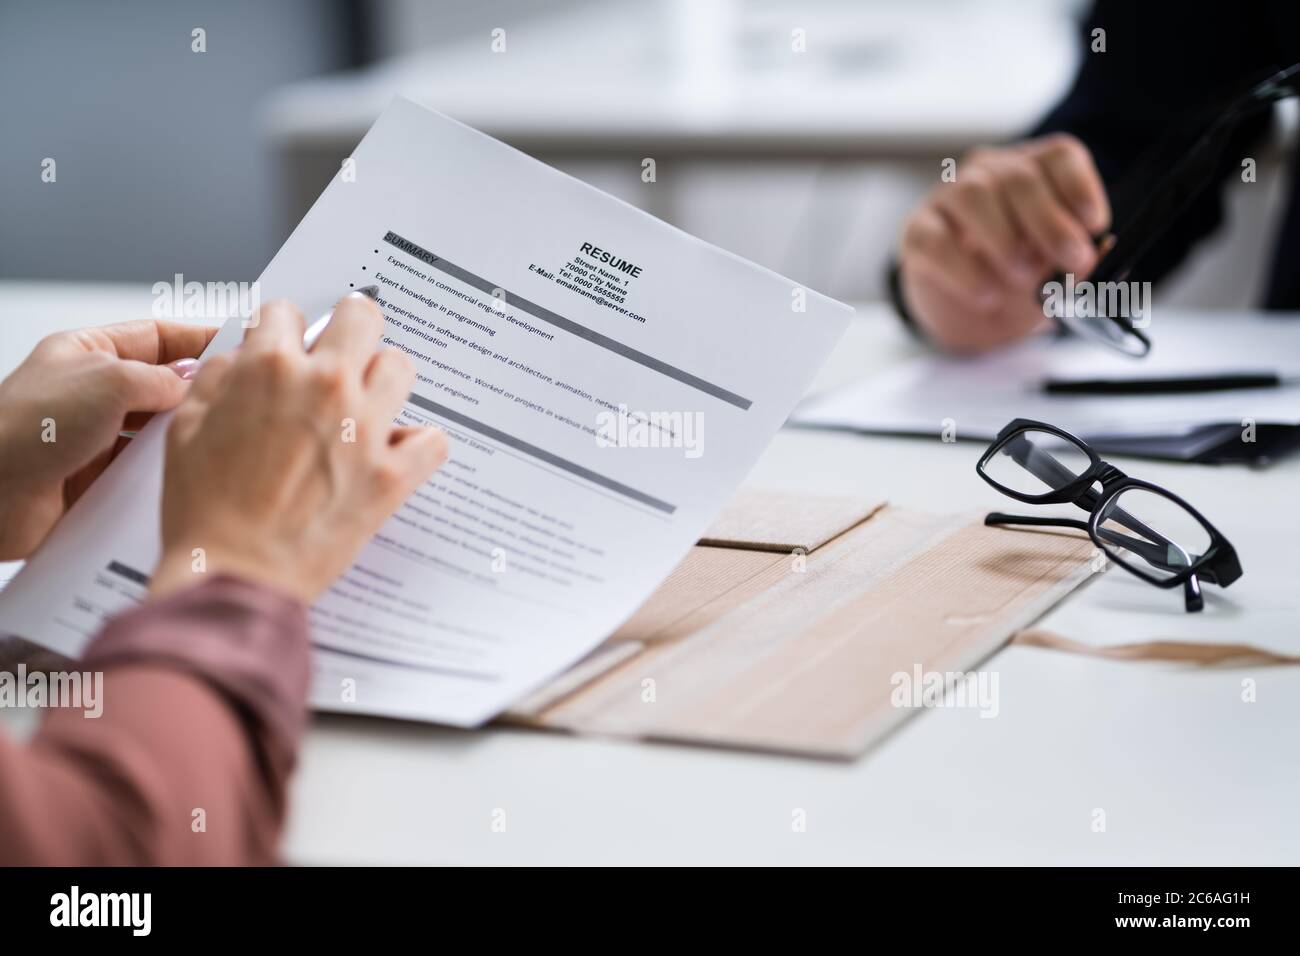 Reading Resume And Recruitment Application At Job Interview Stock Photo